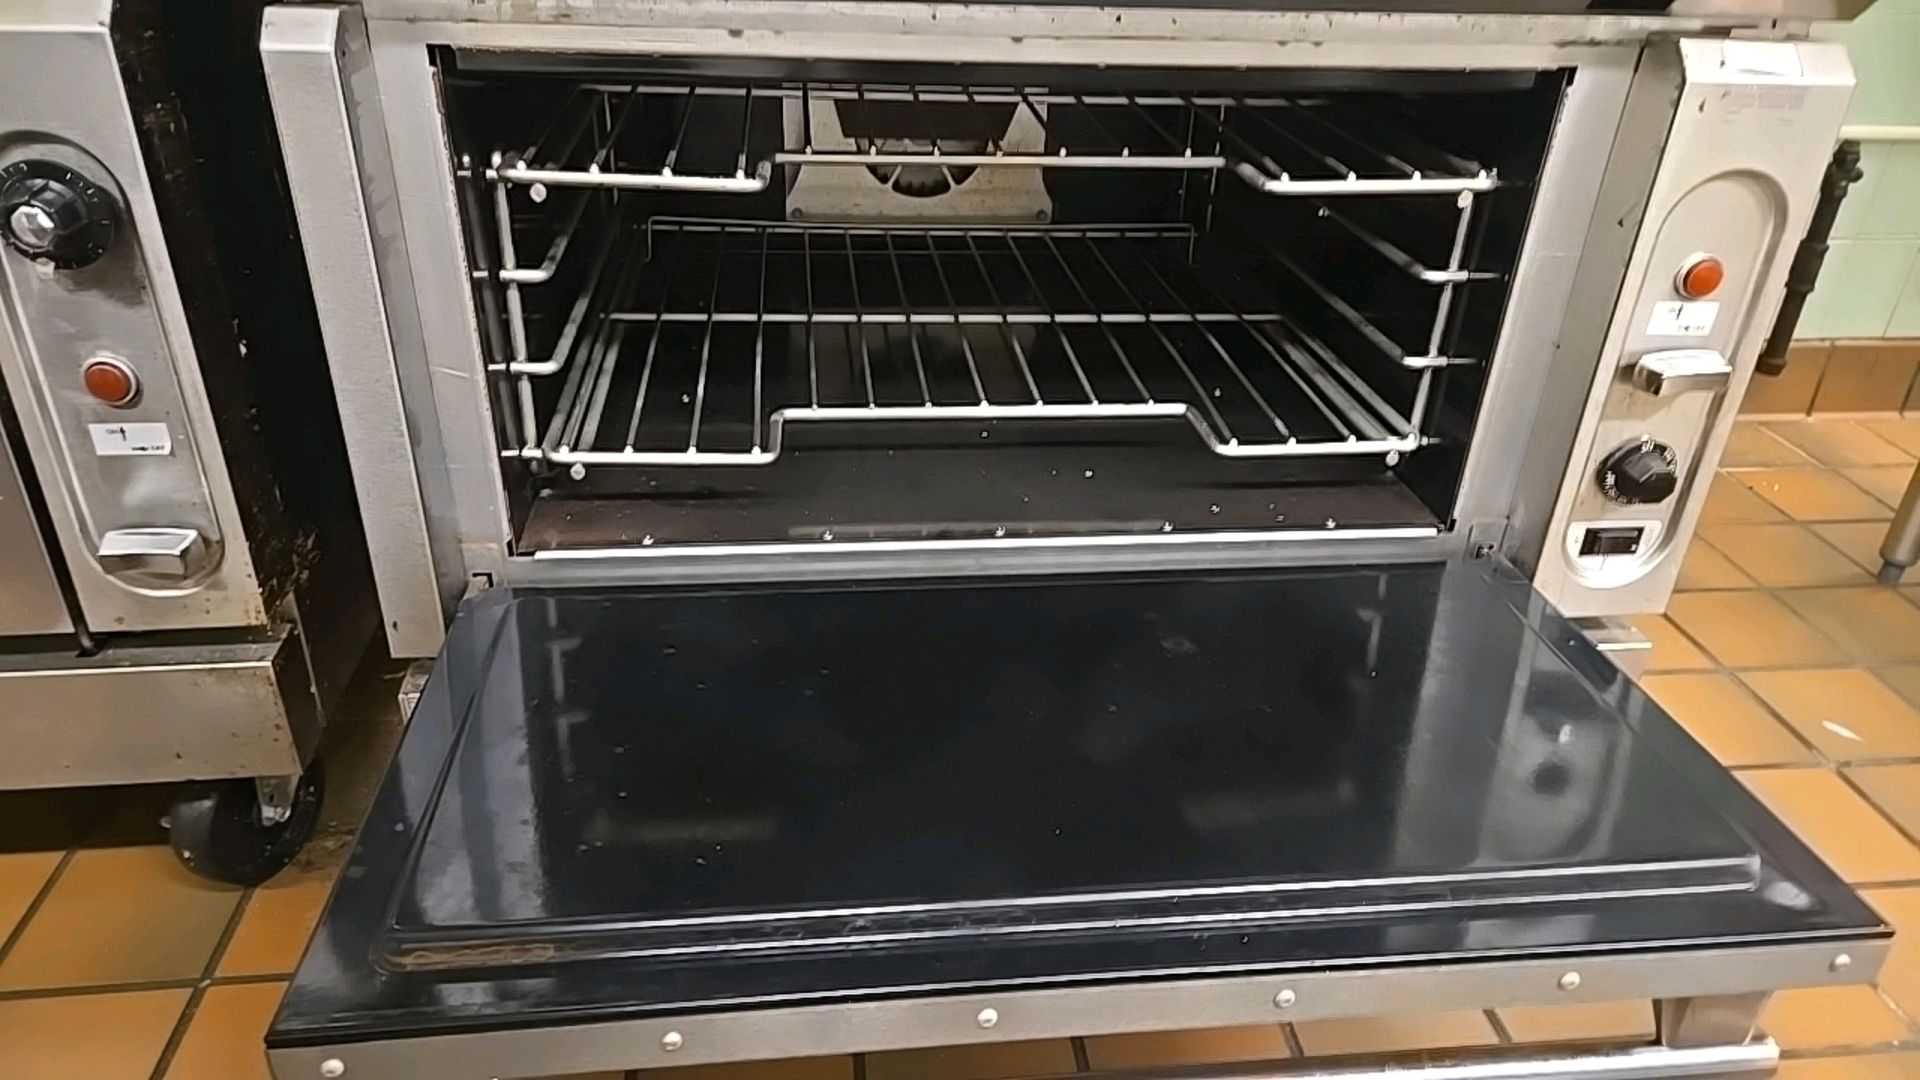 VULCAN/WOLF MODEL NO. VGM36C-500 36" GAS MANUAL RANGE WITH GRIDDLE TOP, OVEN ON WHEELS - Image 3 of 4